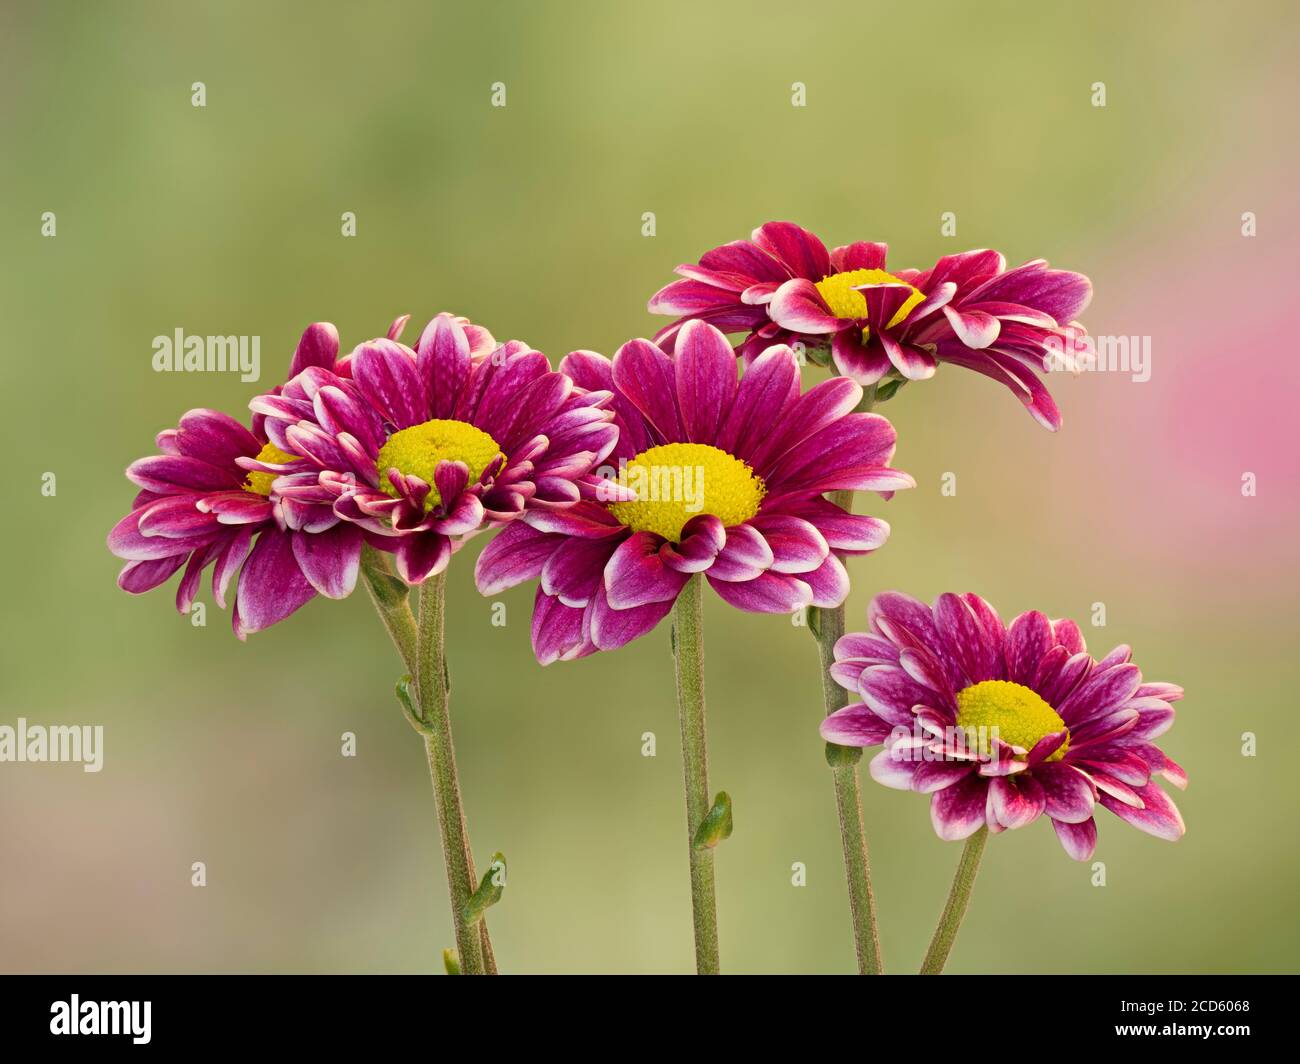 Group of pink daisy flowers Stock Photo